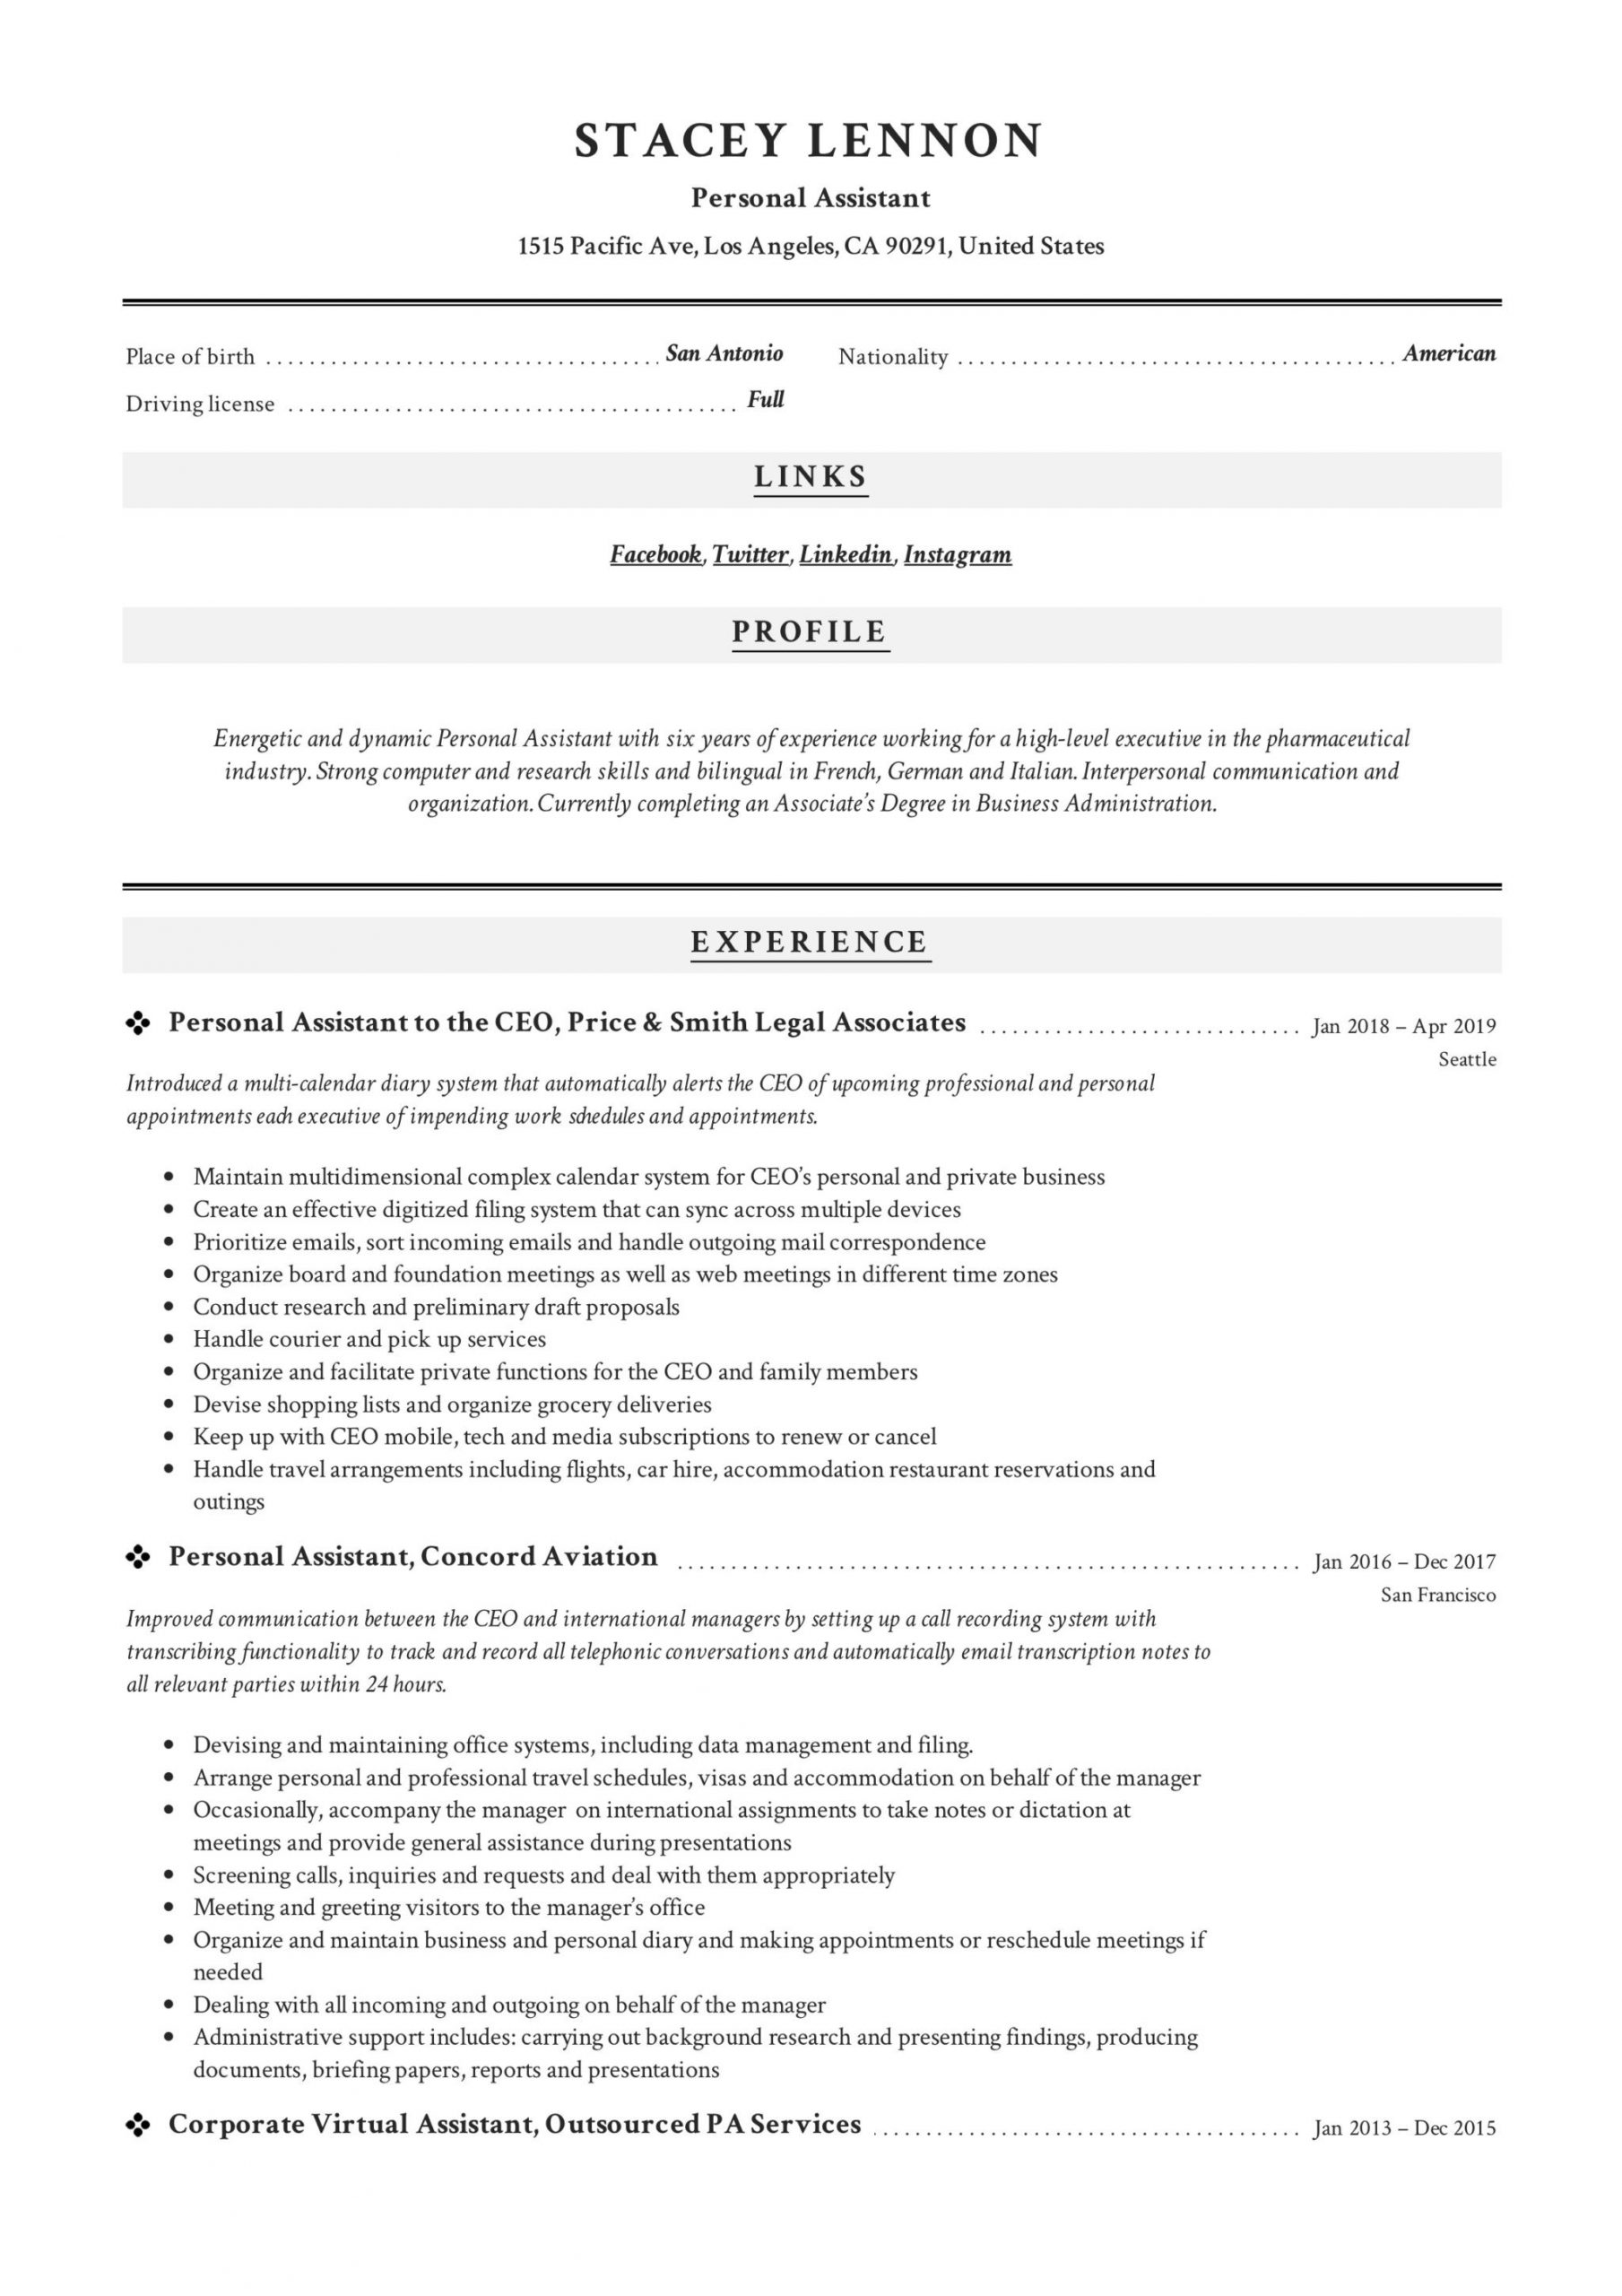 Sample Objectives In Resume for Virtual assistant Personal assistant Resume & Writing Guide  12 Templates Pdf ’20